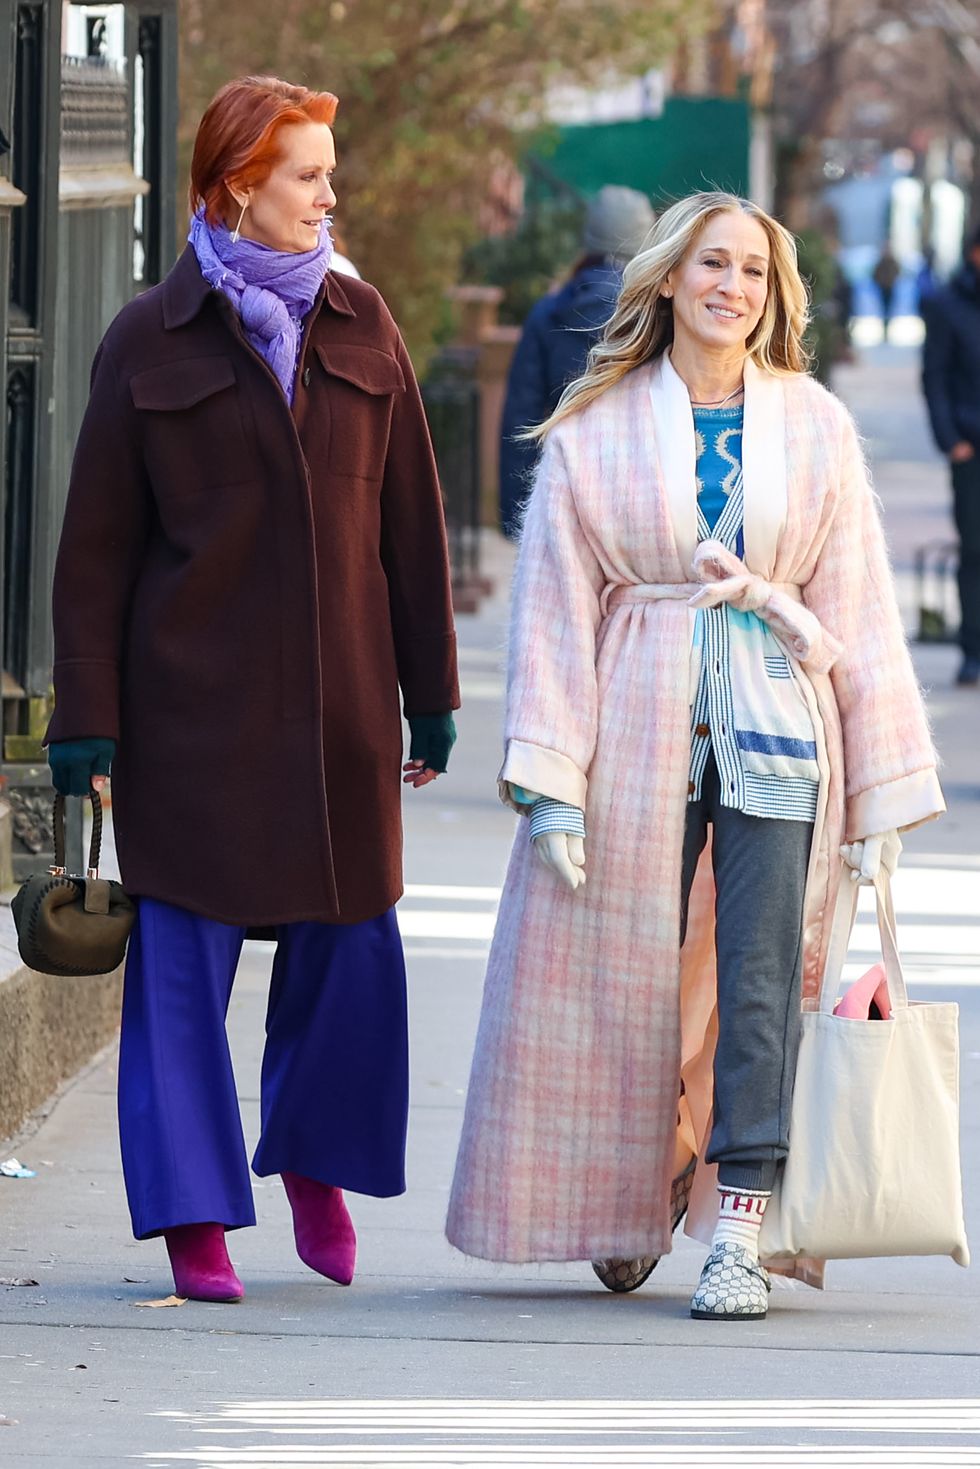 https://hips.hearstapps.com/hmg-prod/images/cynthia-nixon-and-sarah-jessica-parker-are-seen-on-the-set-news-photo-1675852189.jpg?crop=0.793xw:0.892xh;0.105xw,0.108xh&resize=980:*